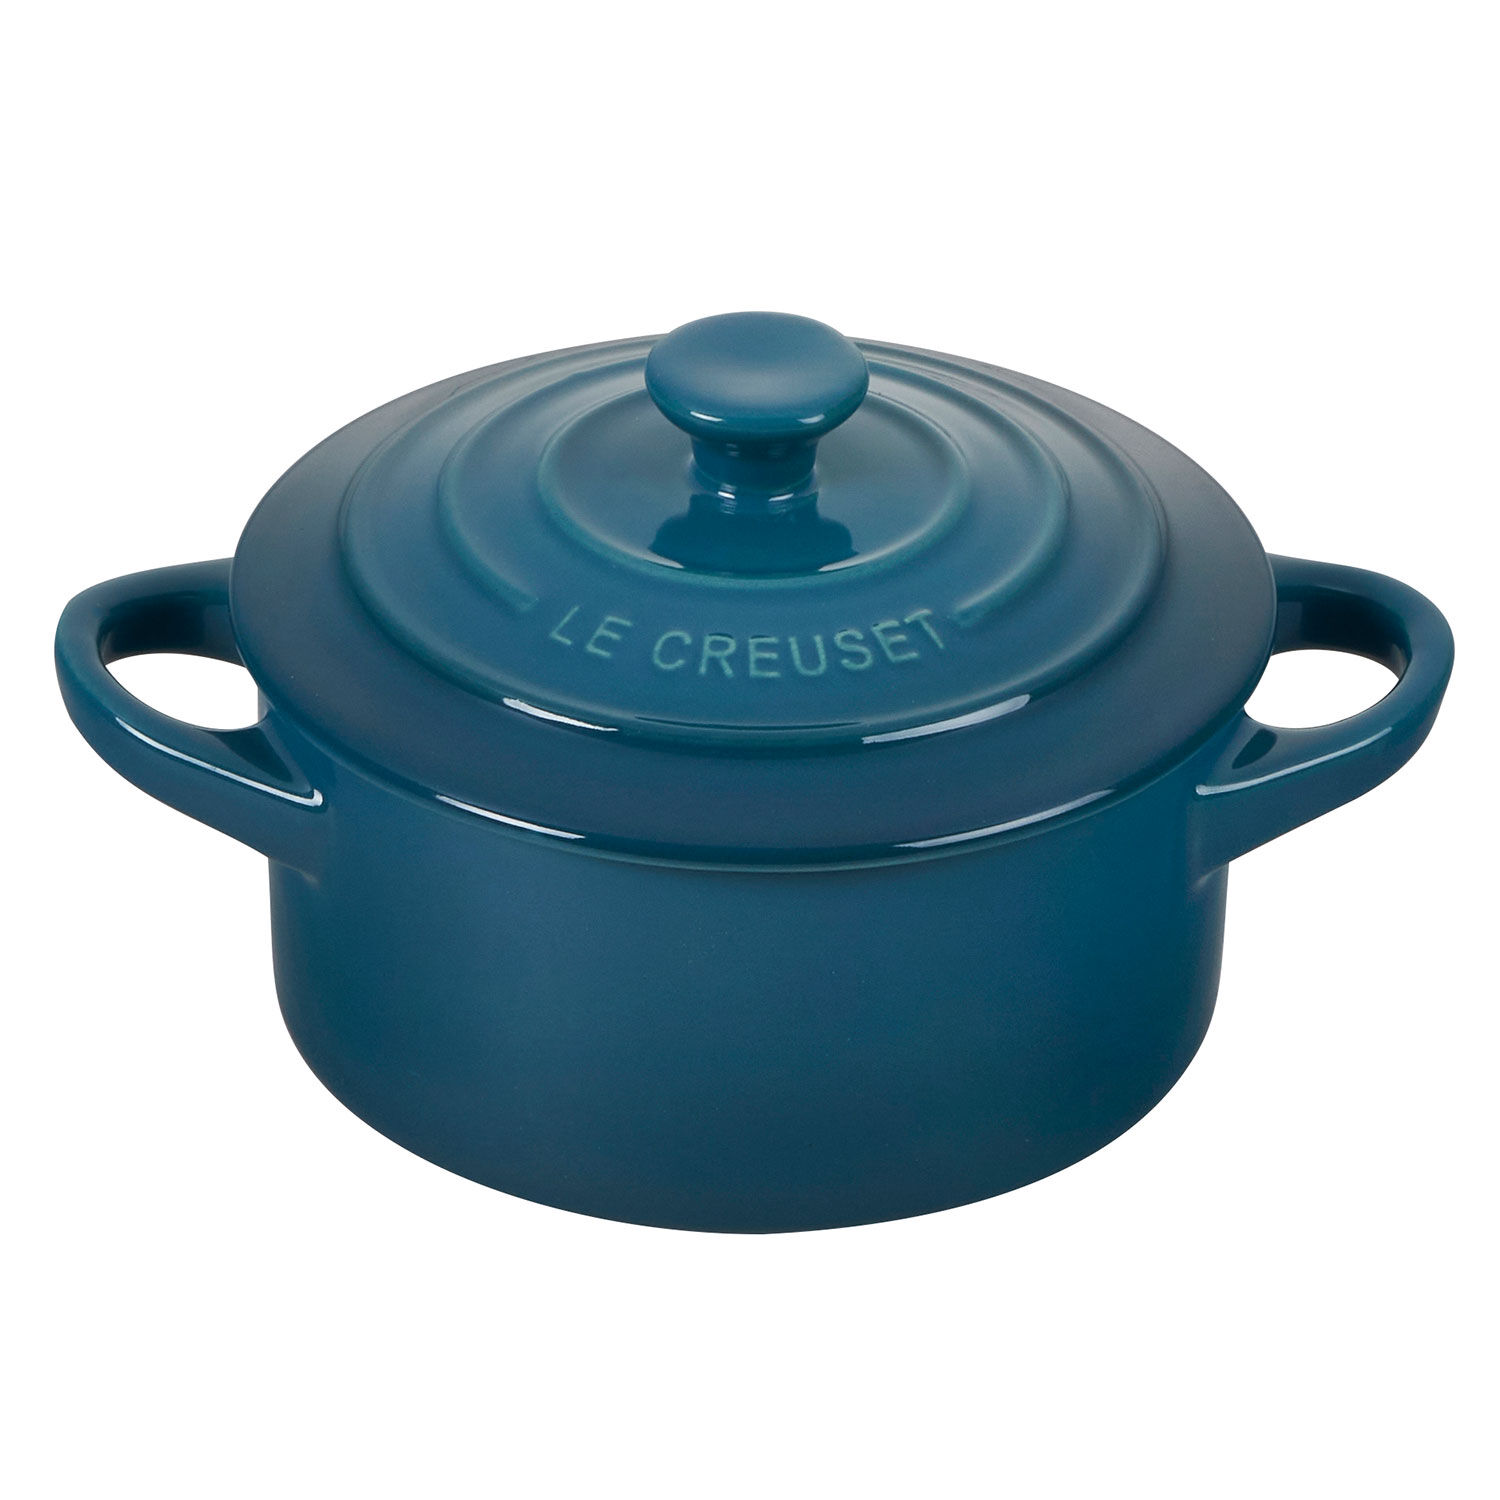 Le Creuset Is Discontinuing Deep Teal—and Having a Major Sale